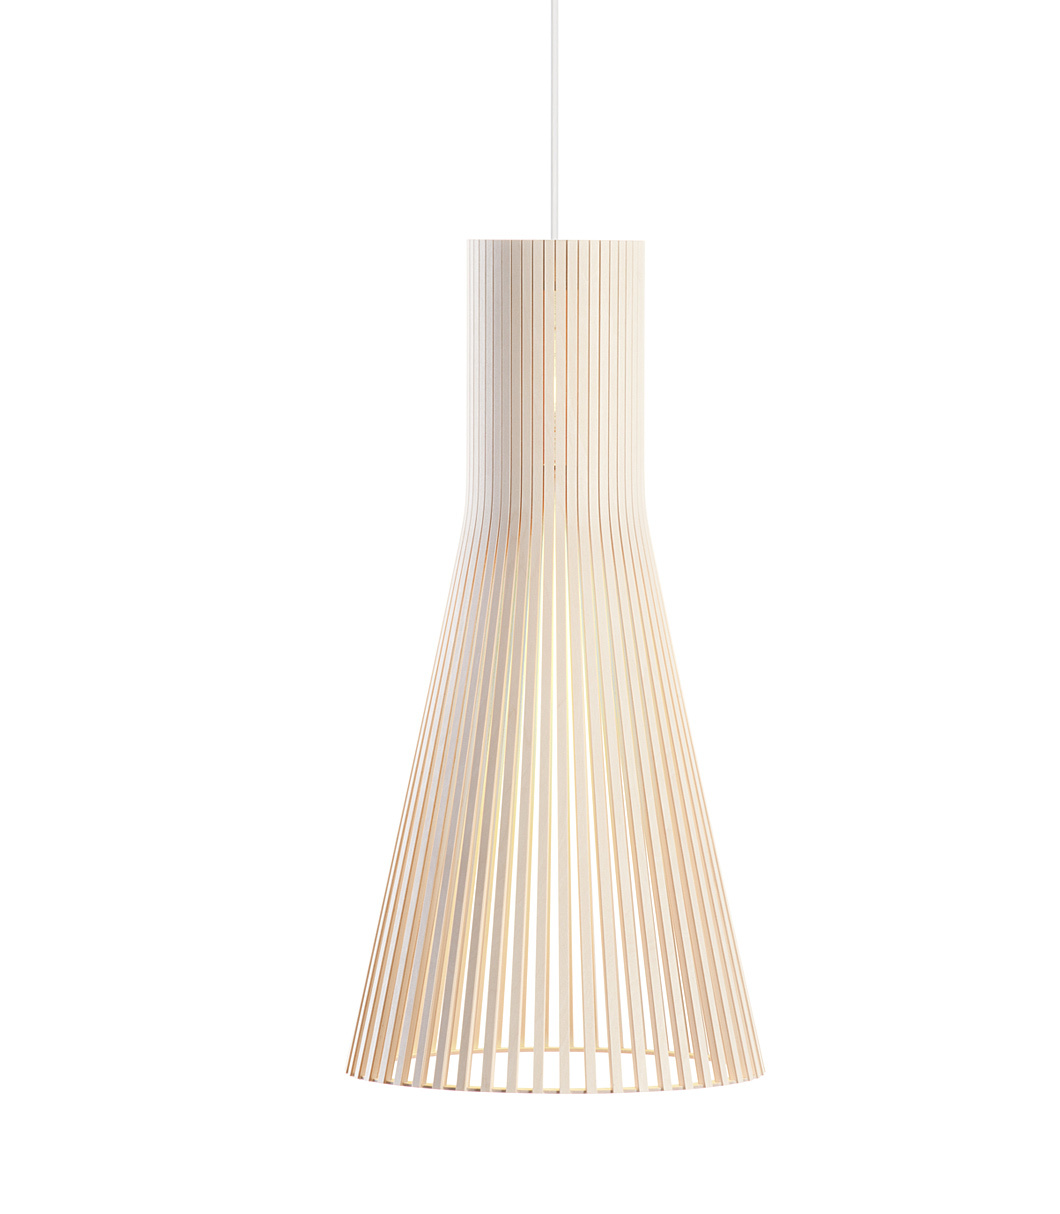 Secto 4200 pendant lamp is available in natural birch